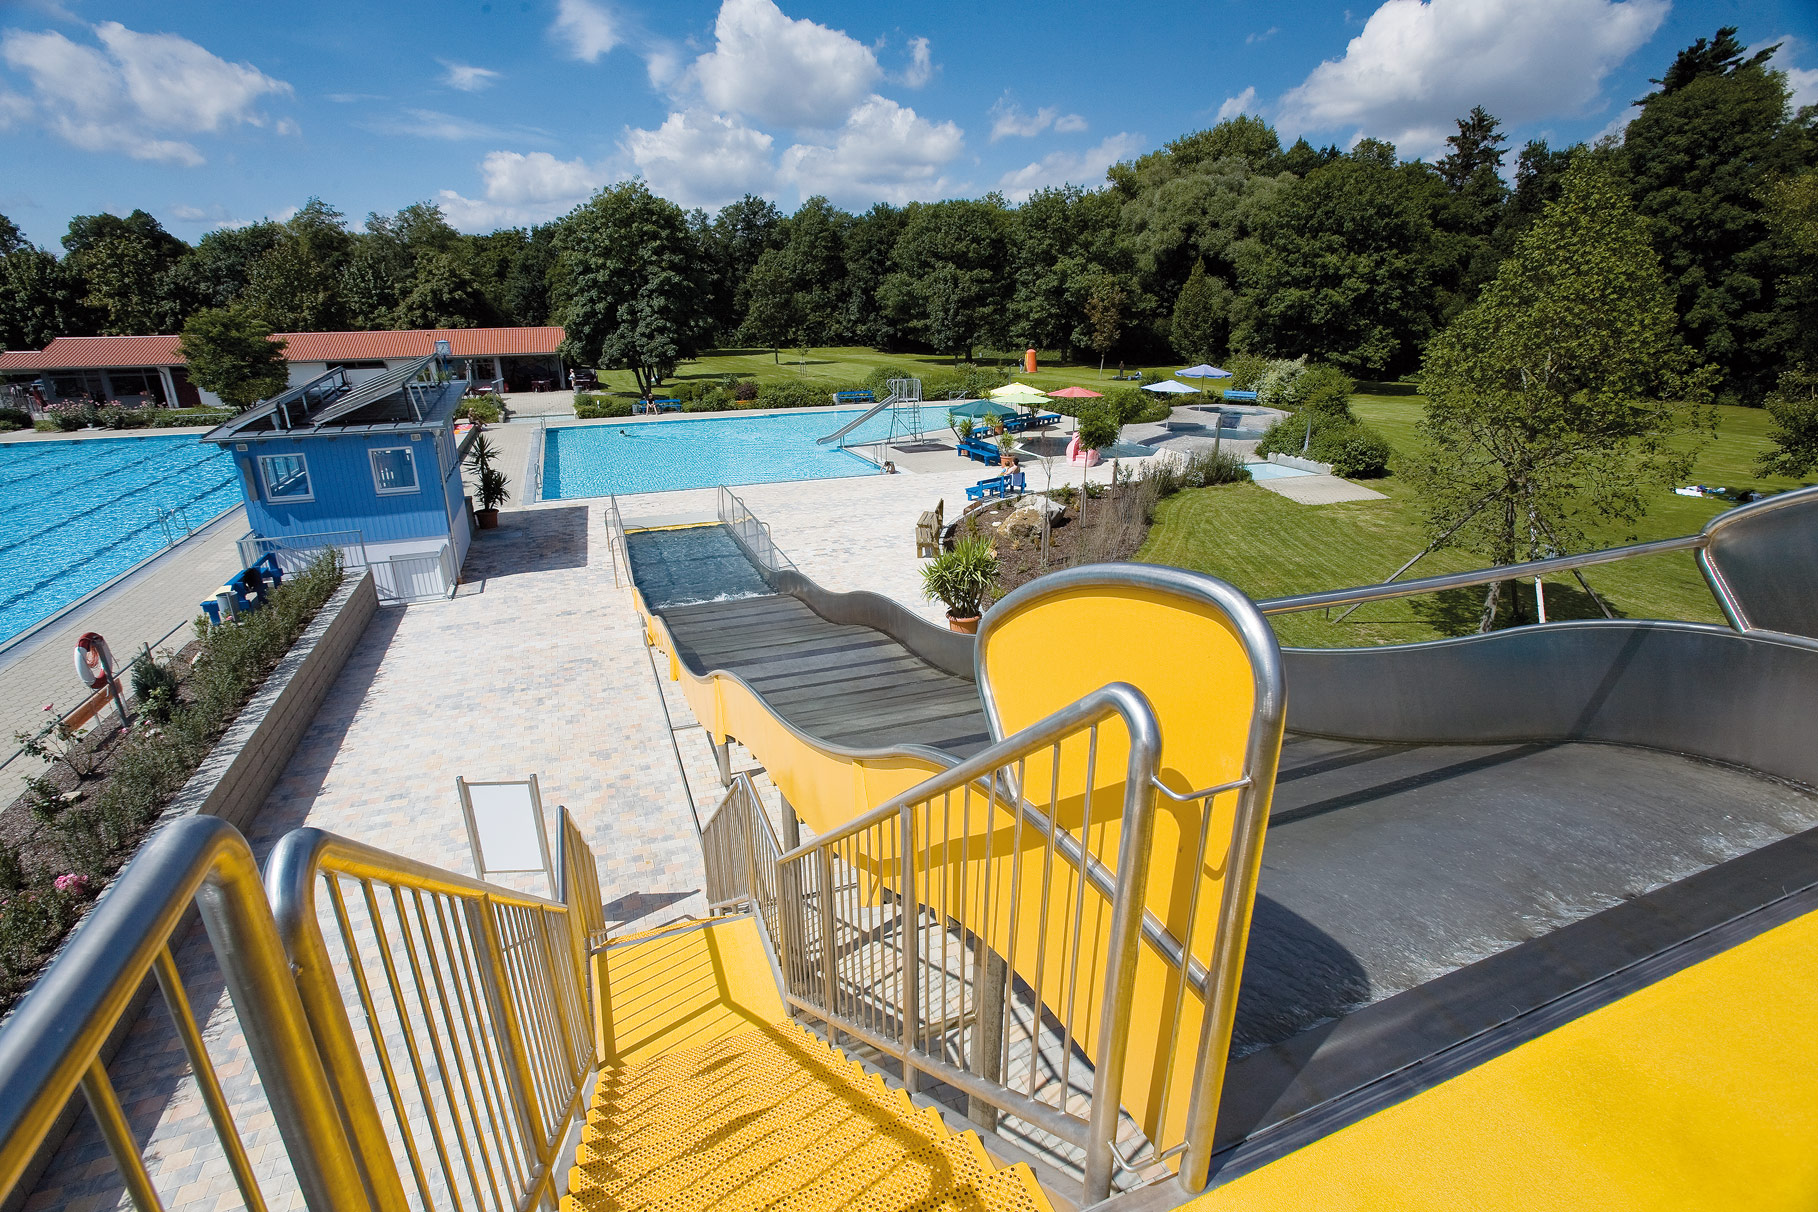 atlantics stainless steel slides open air swimming pool oaknvillage bayern boxwater waterwithlanding pool 076468 Eichenvillage